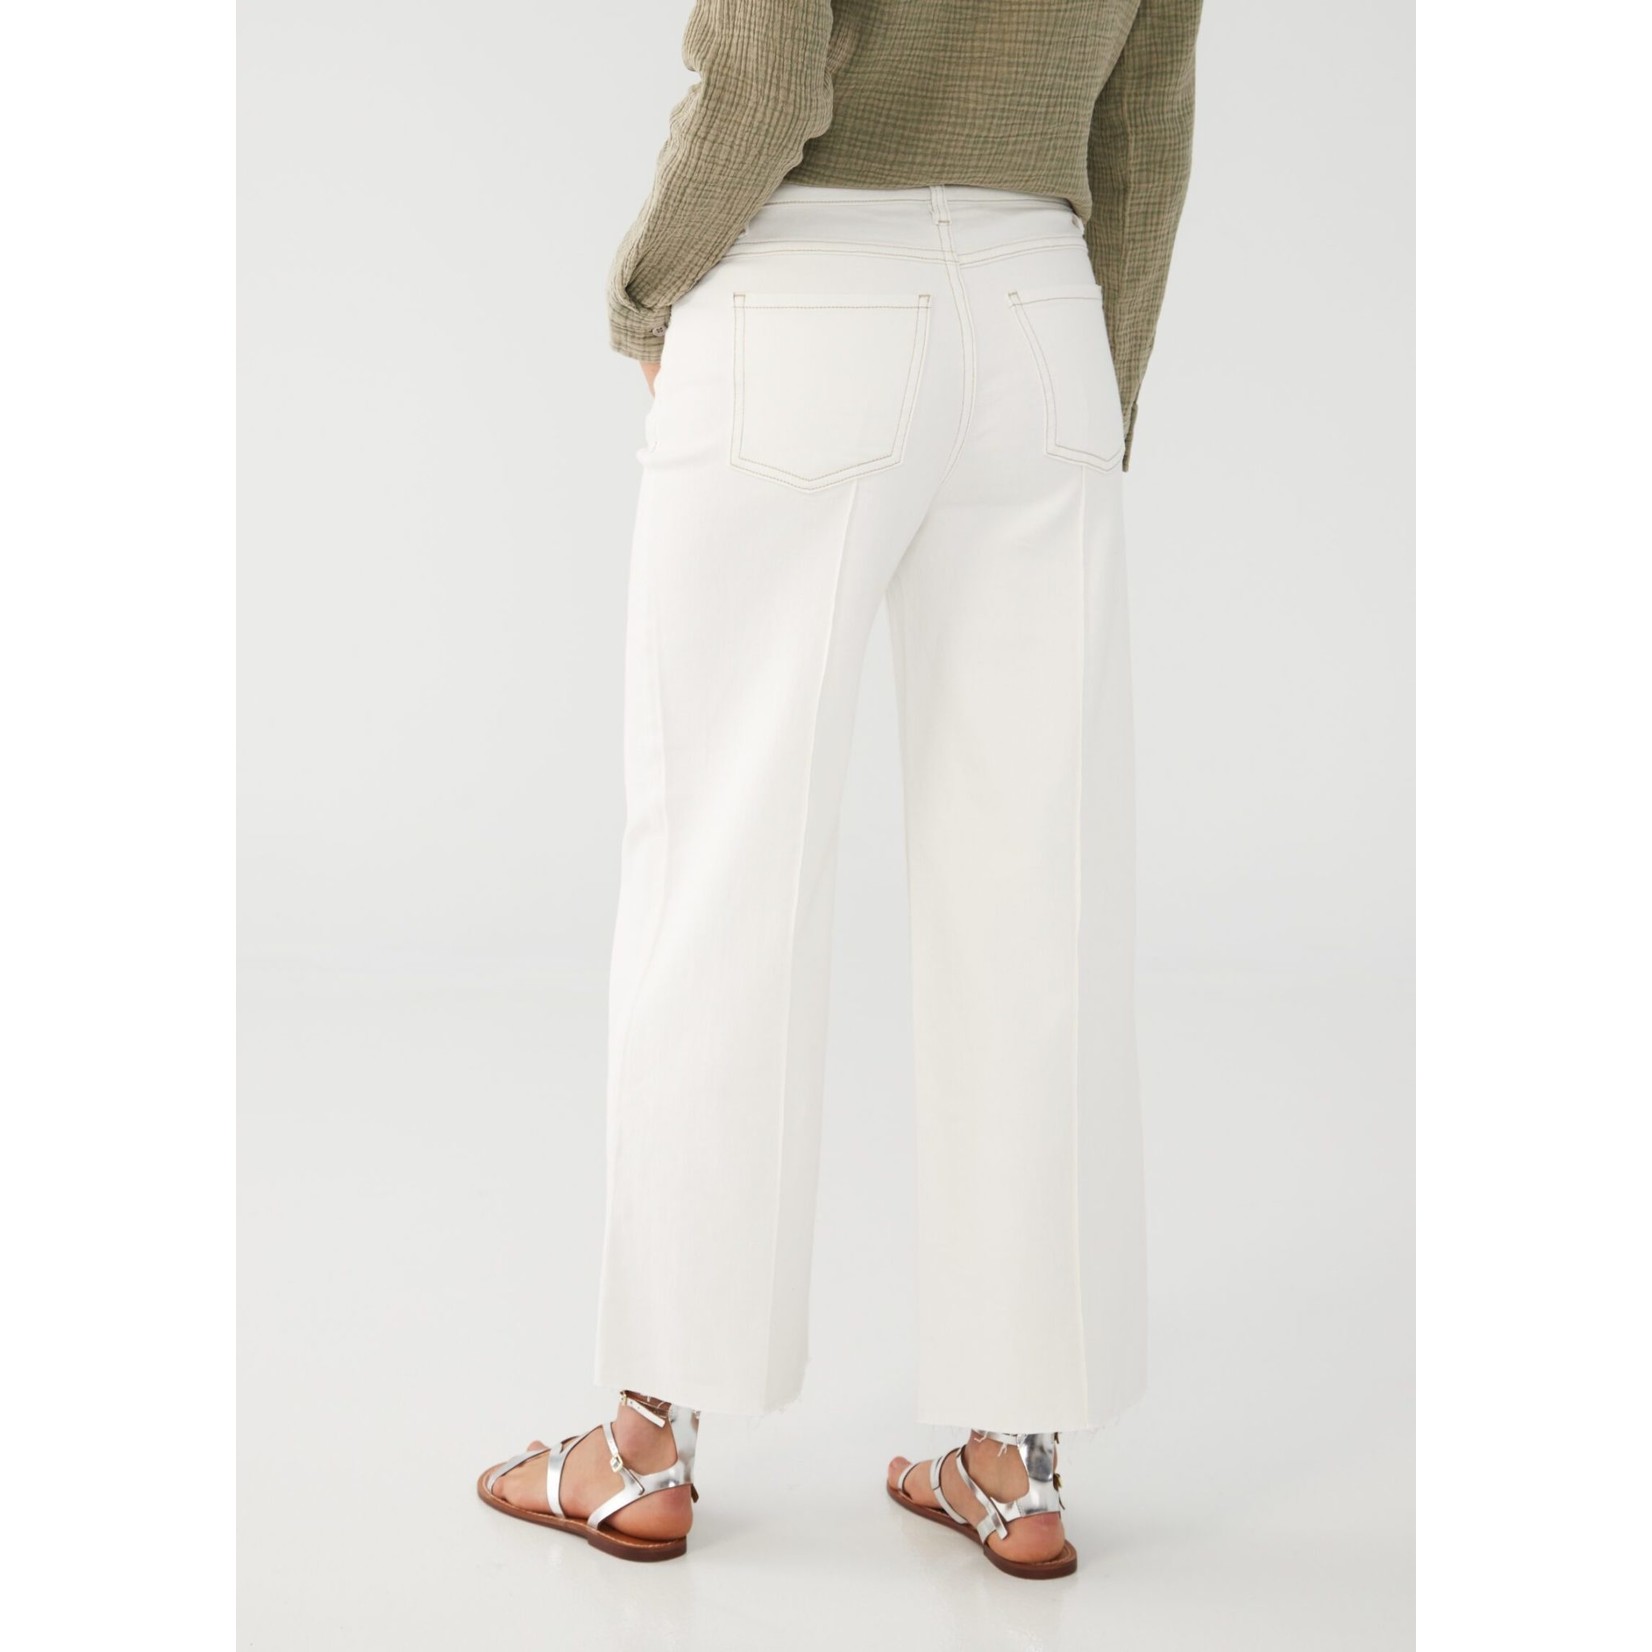 FDJ Olivia Wide Leg Ankle Jeans in Ivory